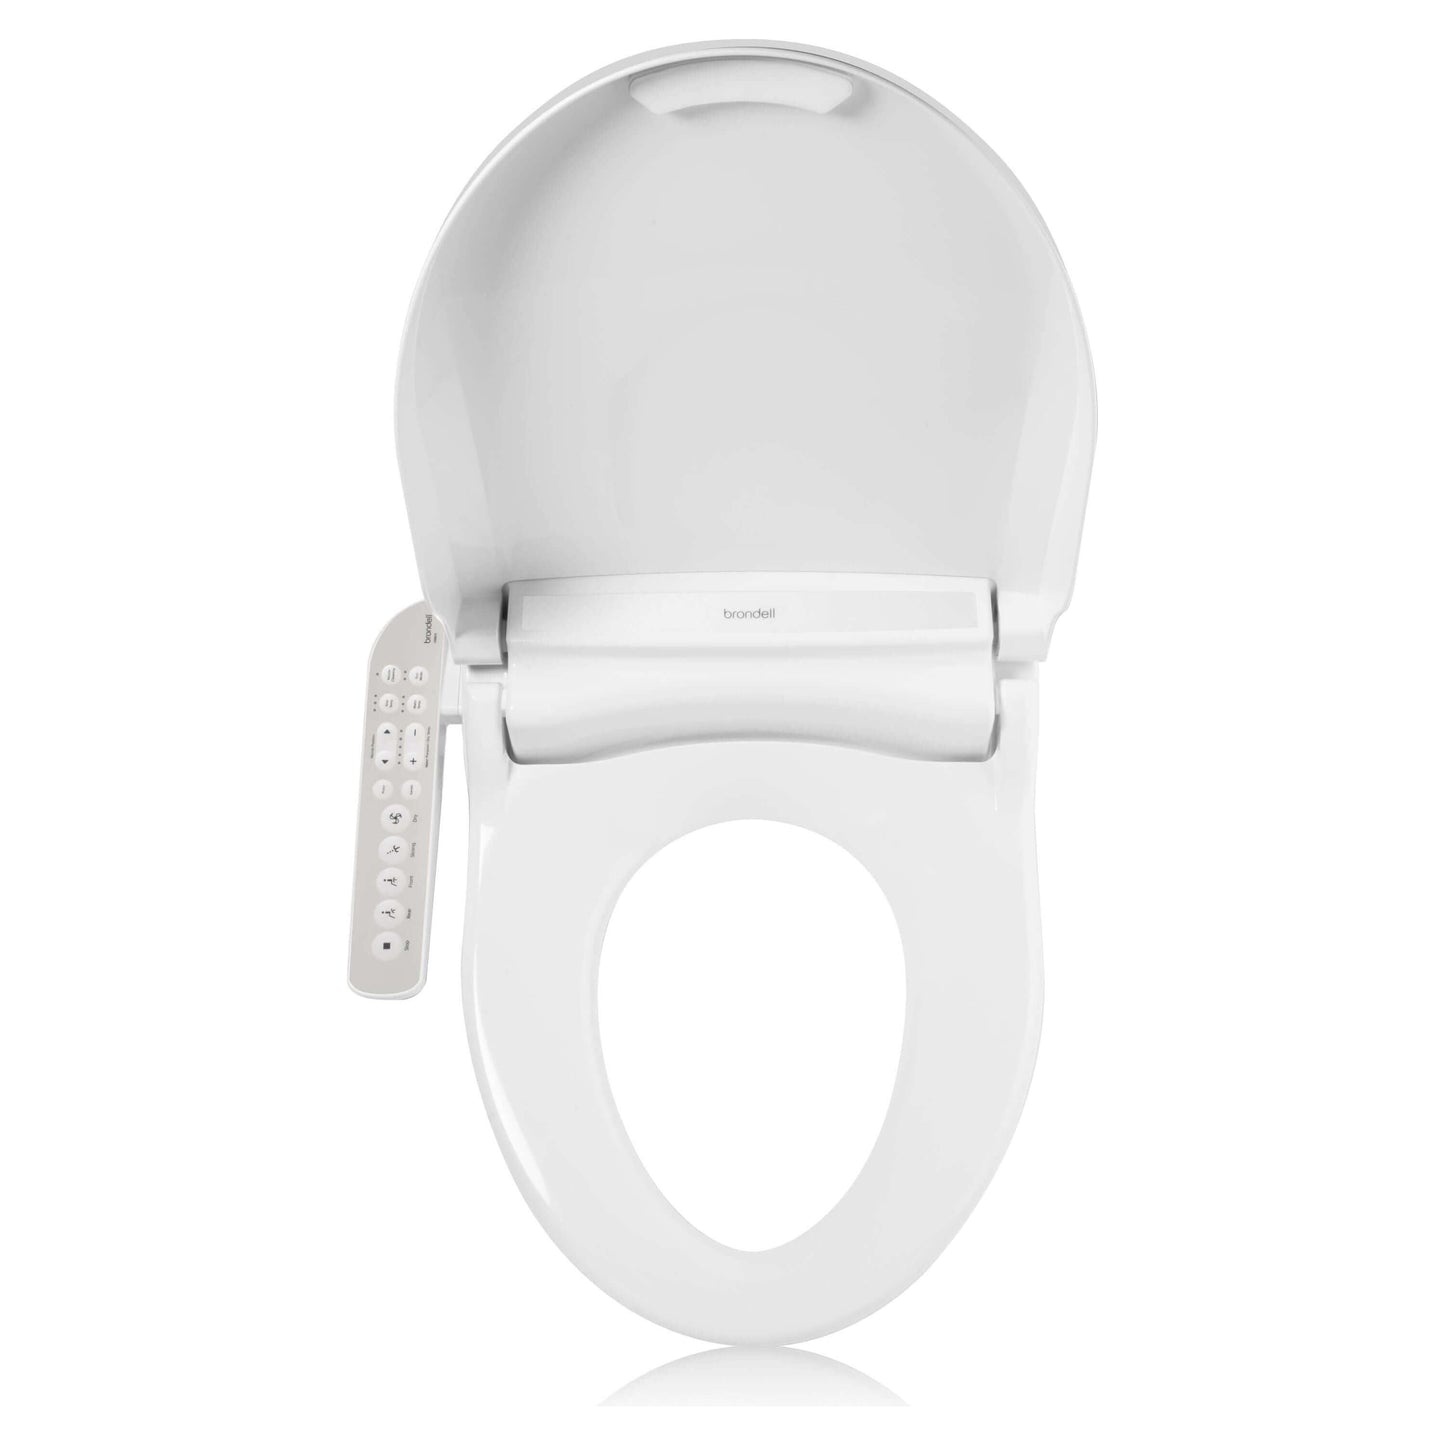 Swash Select DR801 Bidet Seat - top view with lid open